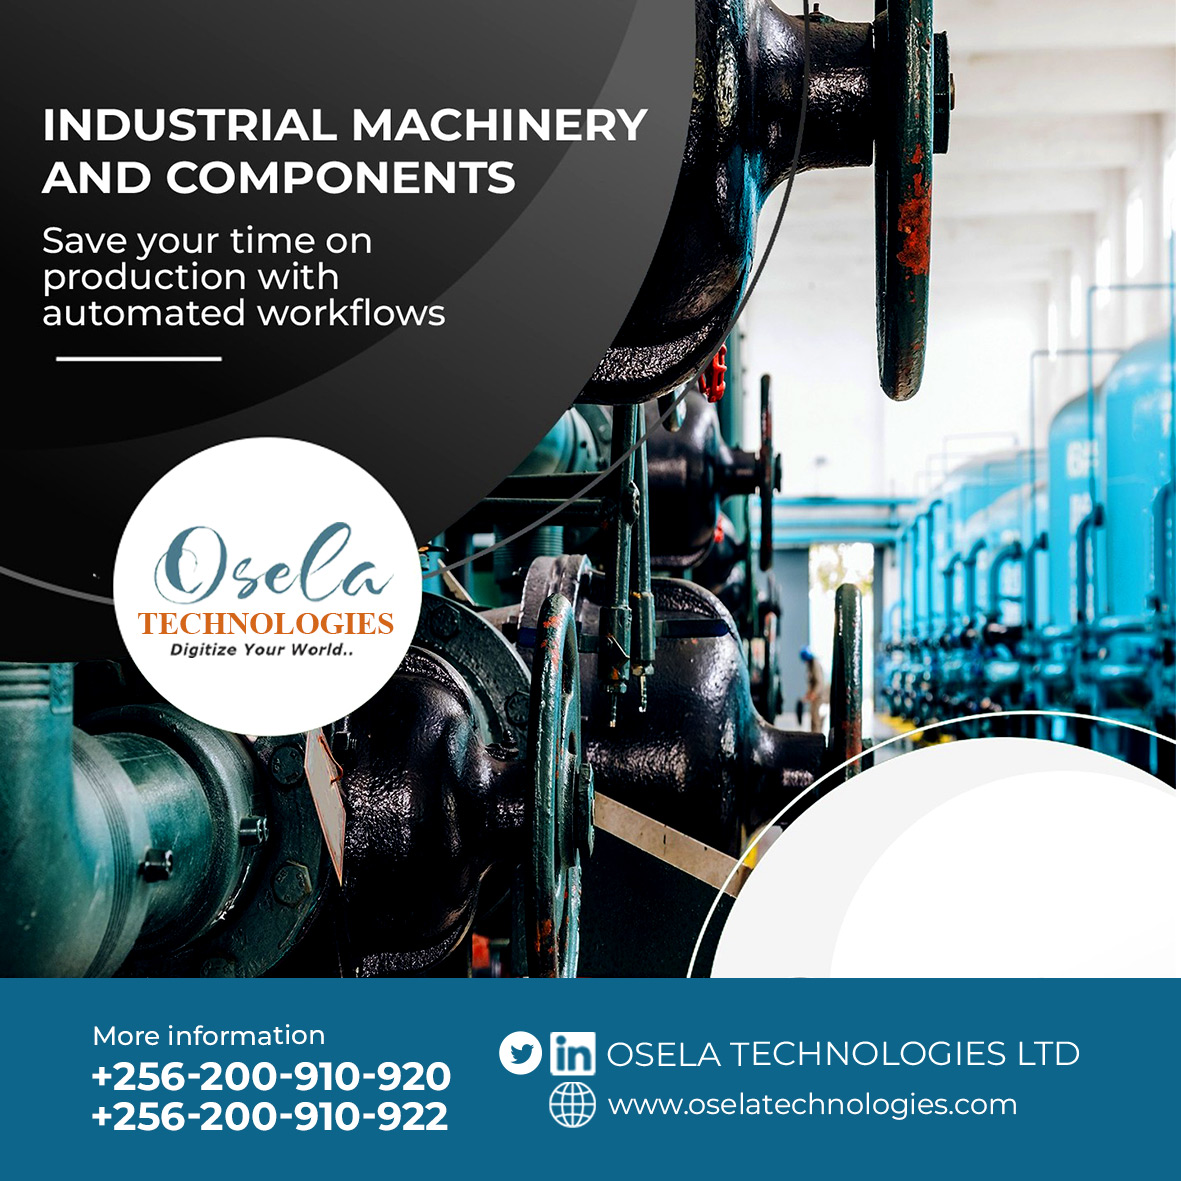 🤖Automate your machinery and components processes with ease. 💼 Save time and resources by eliminating repetitive tasks. 🚀 Boost productivity and achieve faster turnaround times.
#Automation #Efficiency #IndustrialTech #StreamlineWorkflows #OSELATechnologies